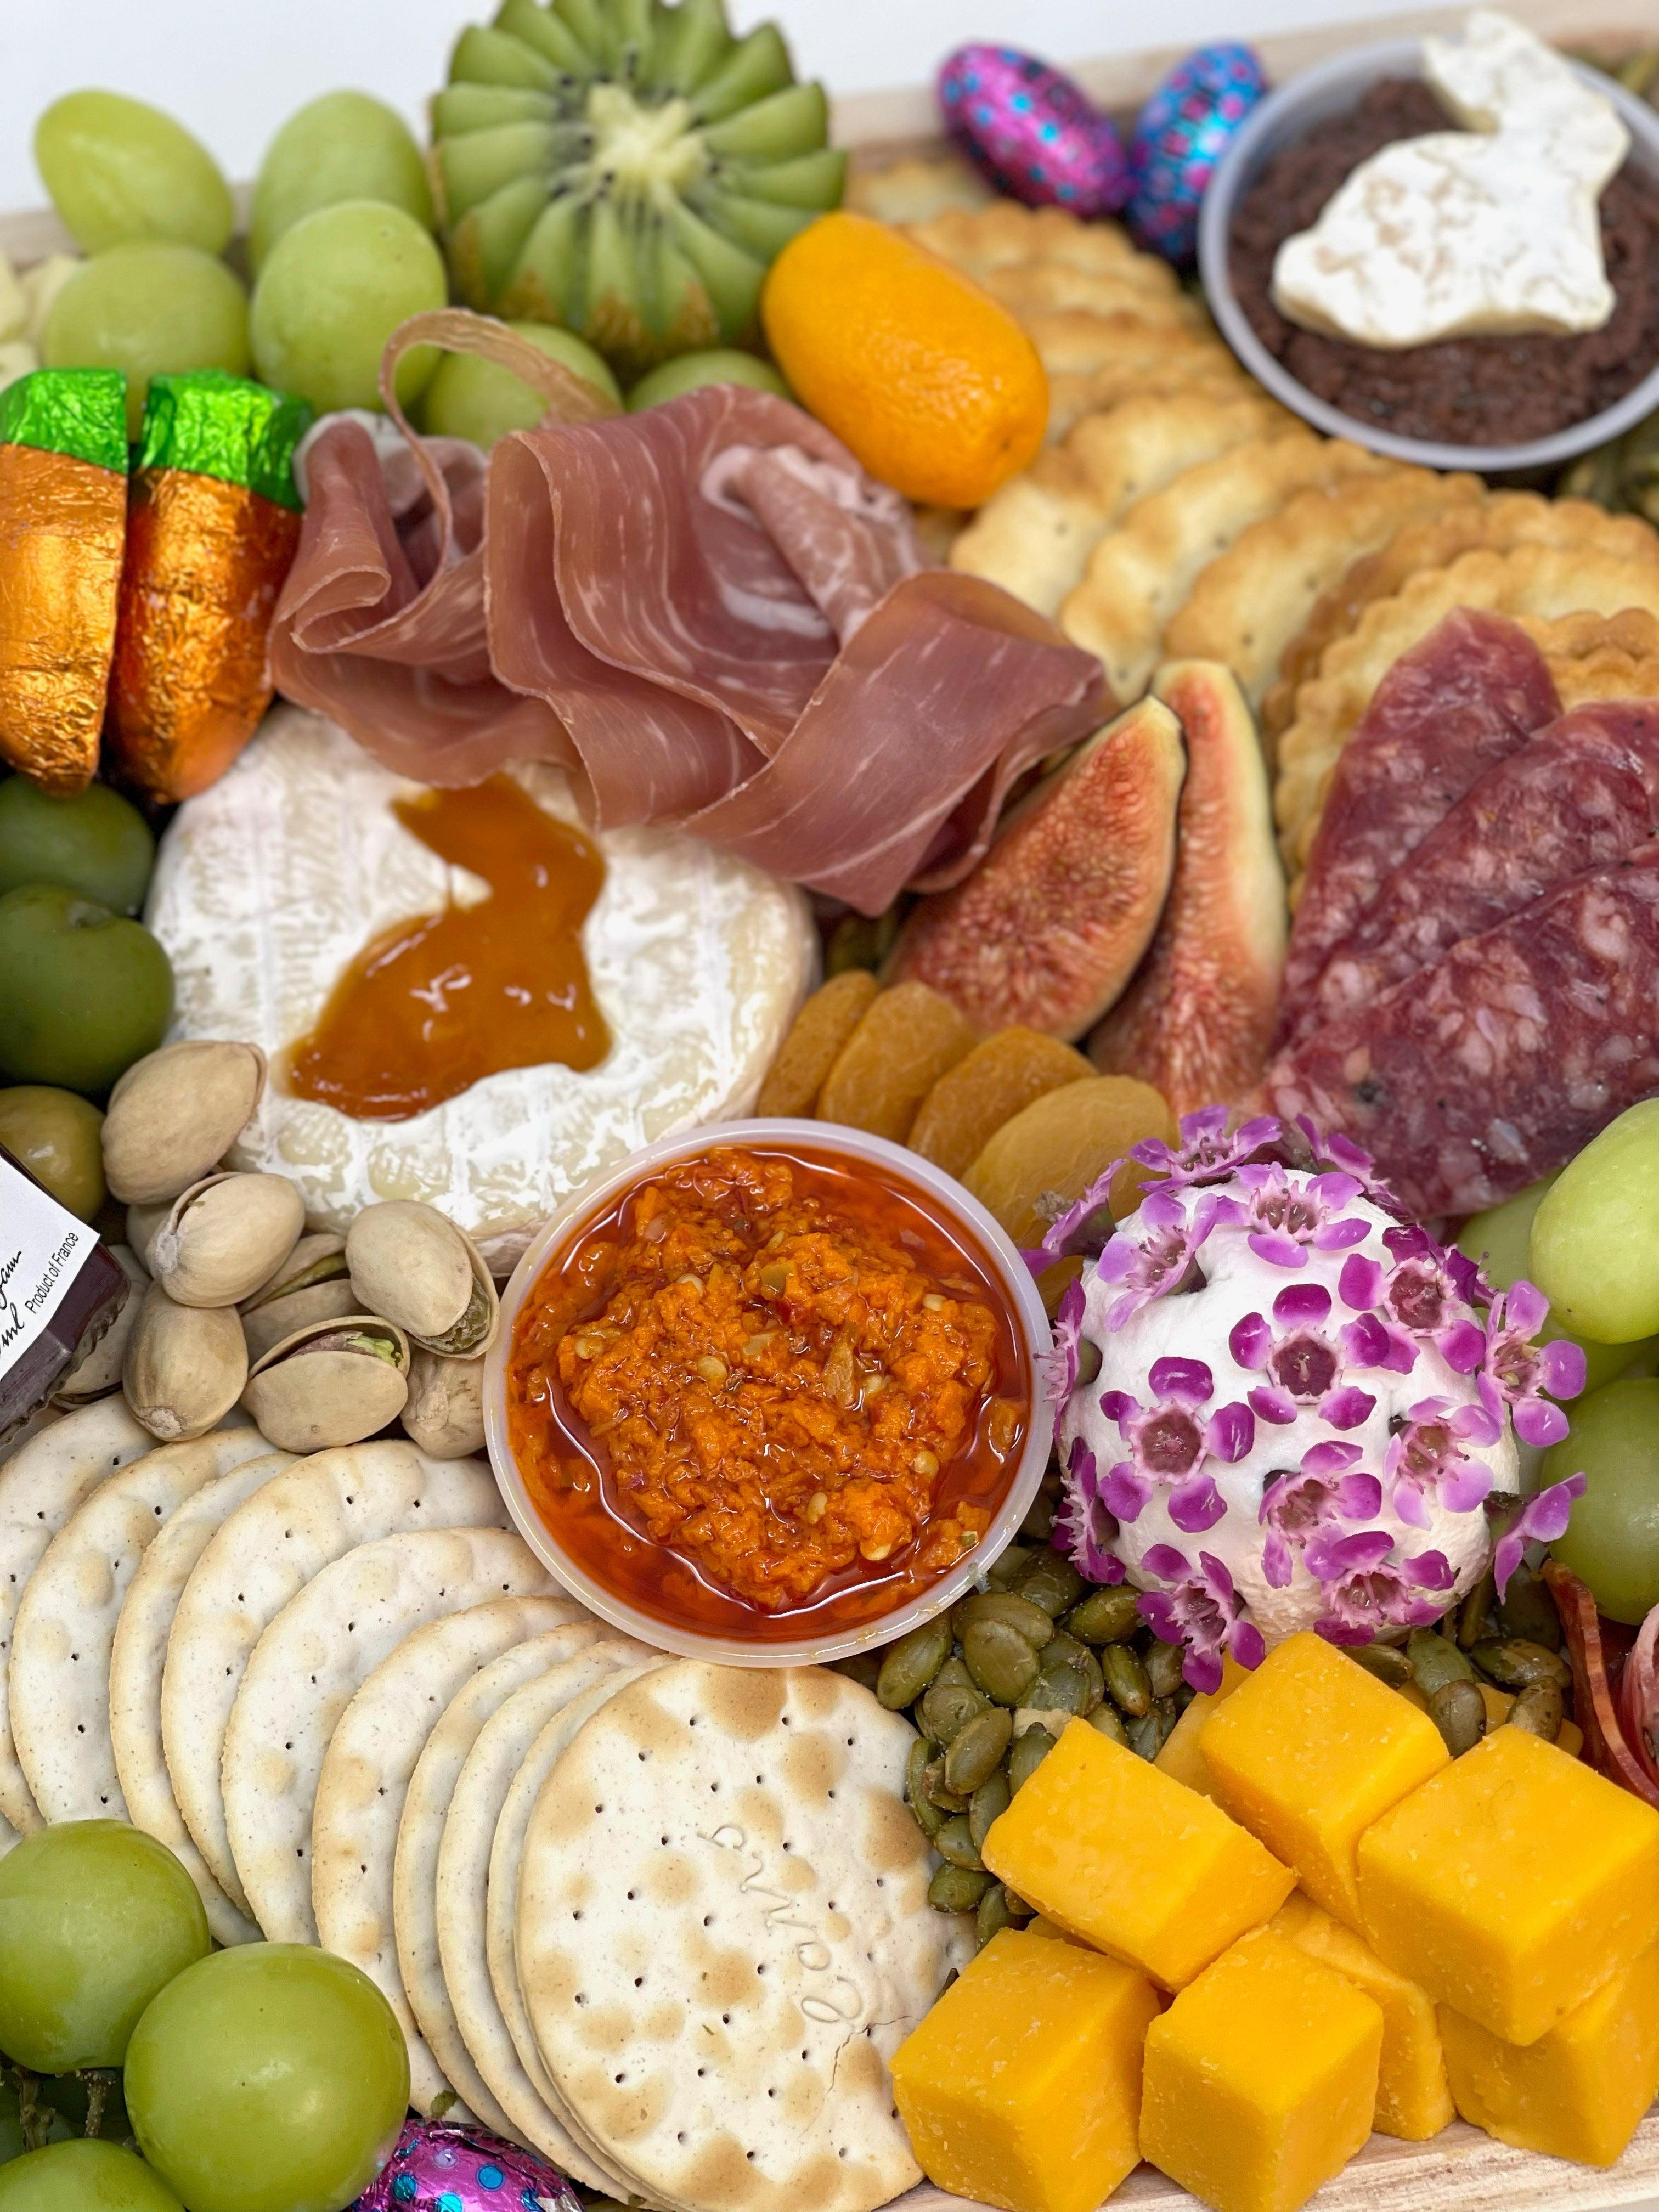 Easter Charcuterie Tray-Charcuterie-Corporate Catering Toronto-Best Charcuterie-Catering Toronto-Cured Catering